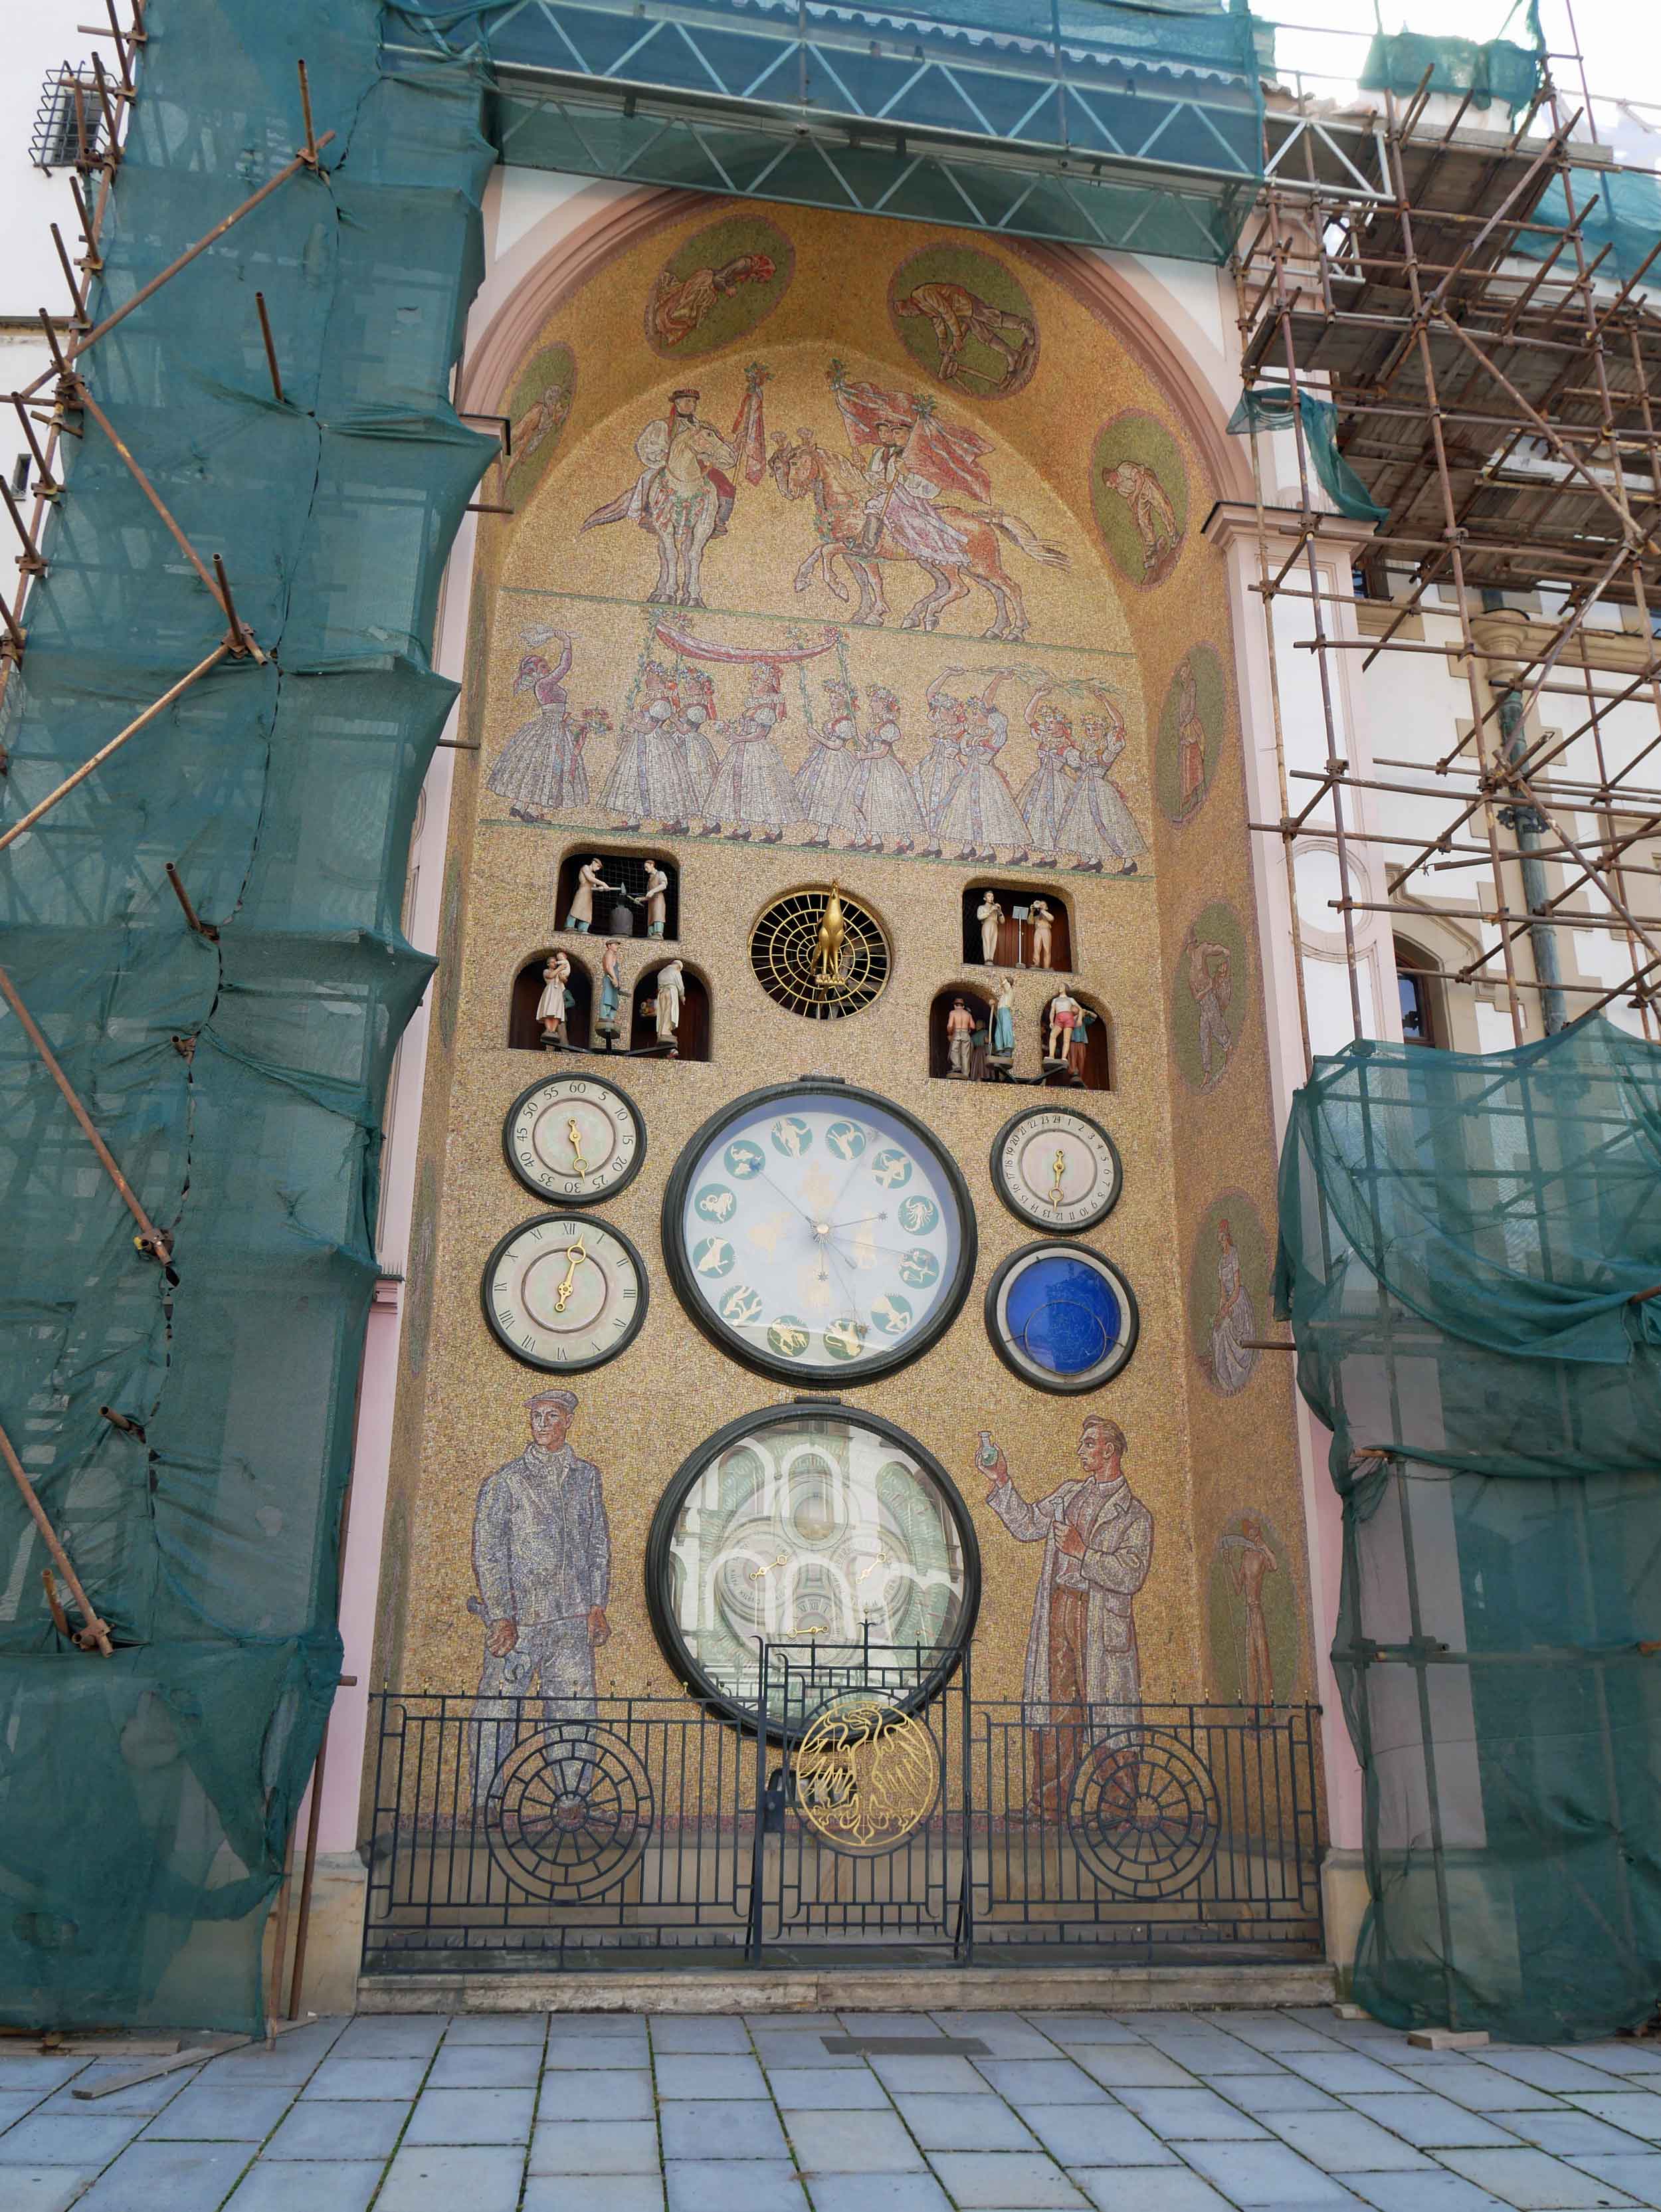  Olomouc’s Astronomical Clock is quite different from it’s sister clock in Prague - deemed the ‘Communist Clock’ for its Soviet era proletarians motif, Olomouc’s original 15th century clock was destroyed by the Germans during WWII and rebuilt during 